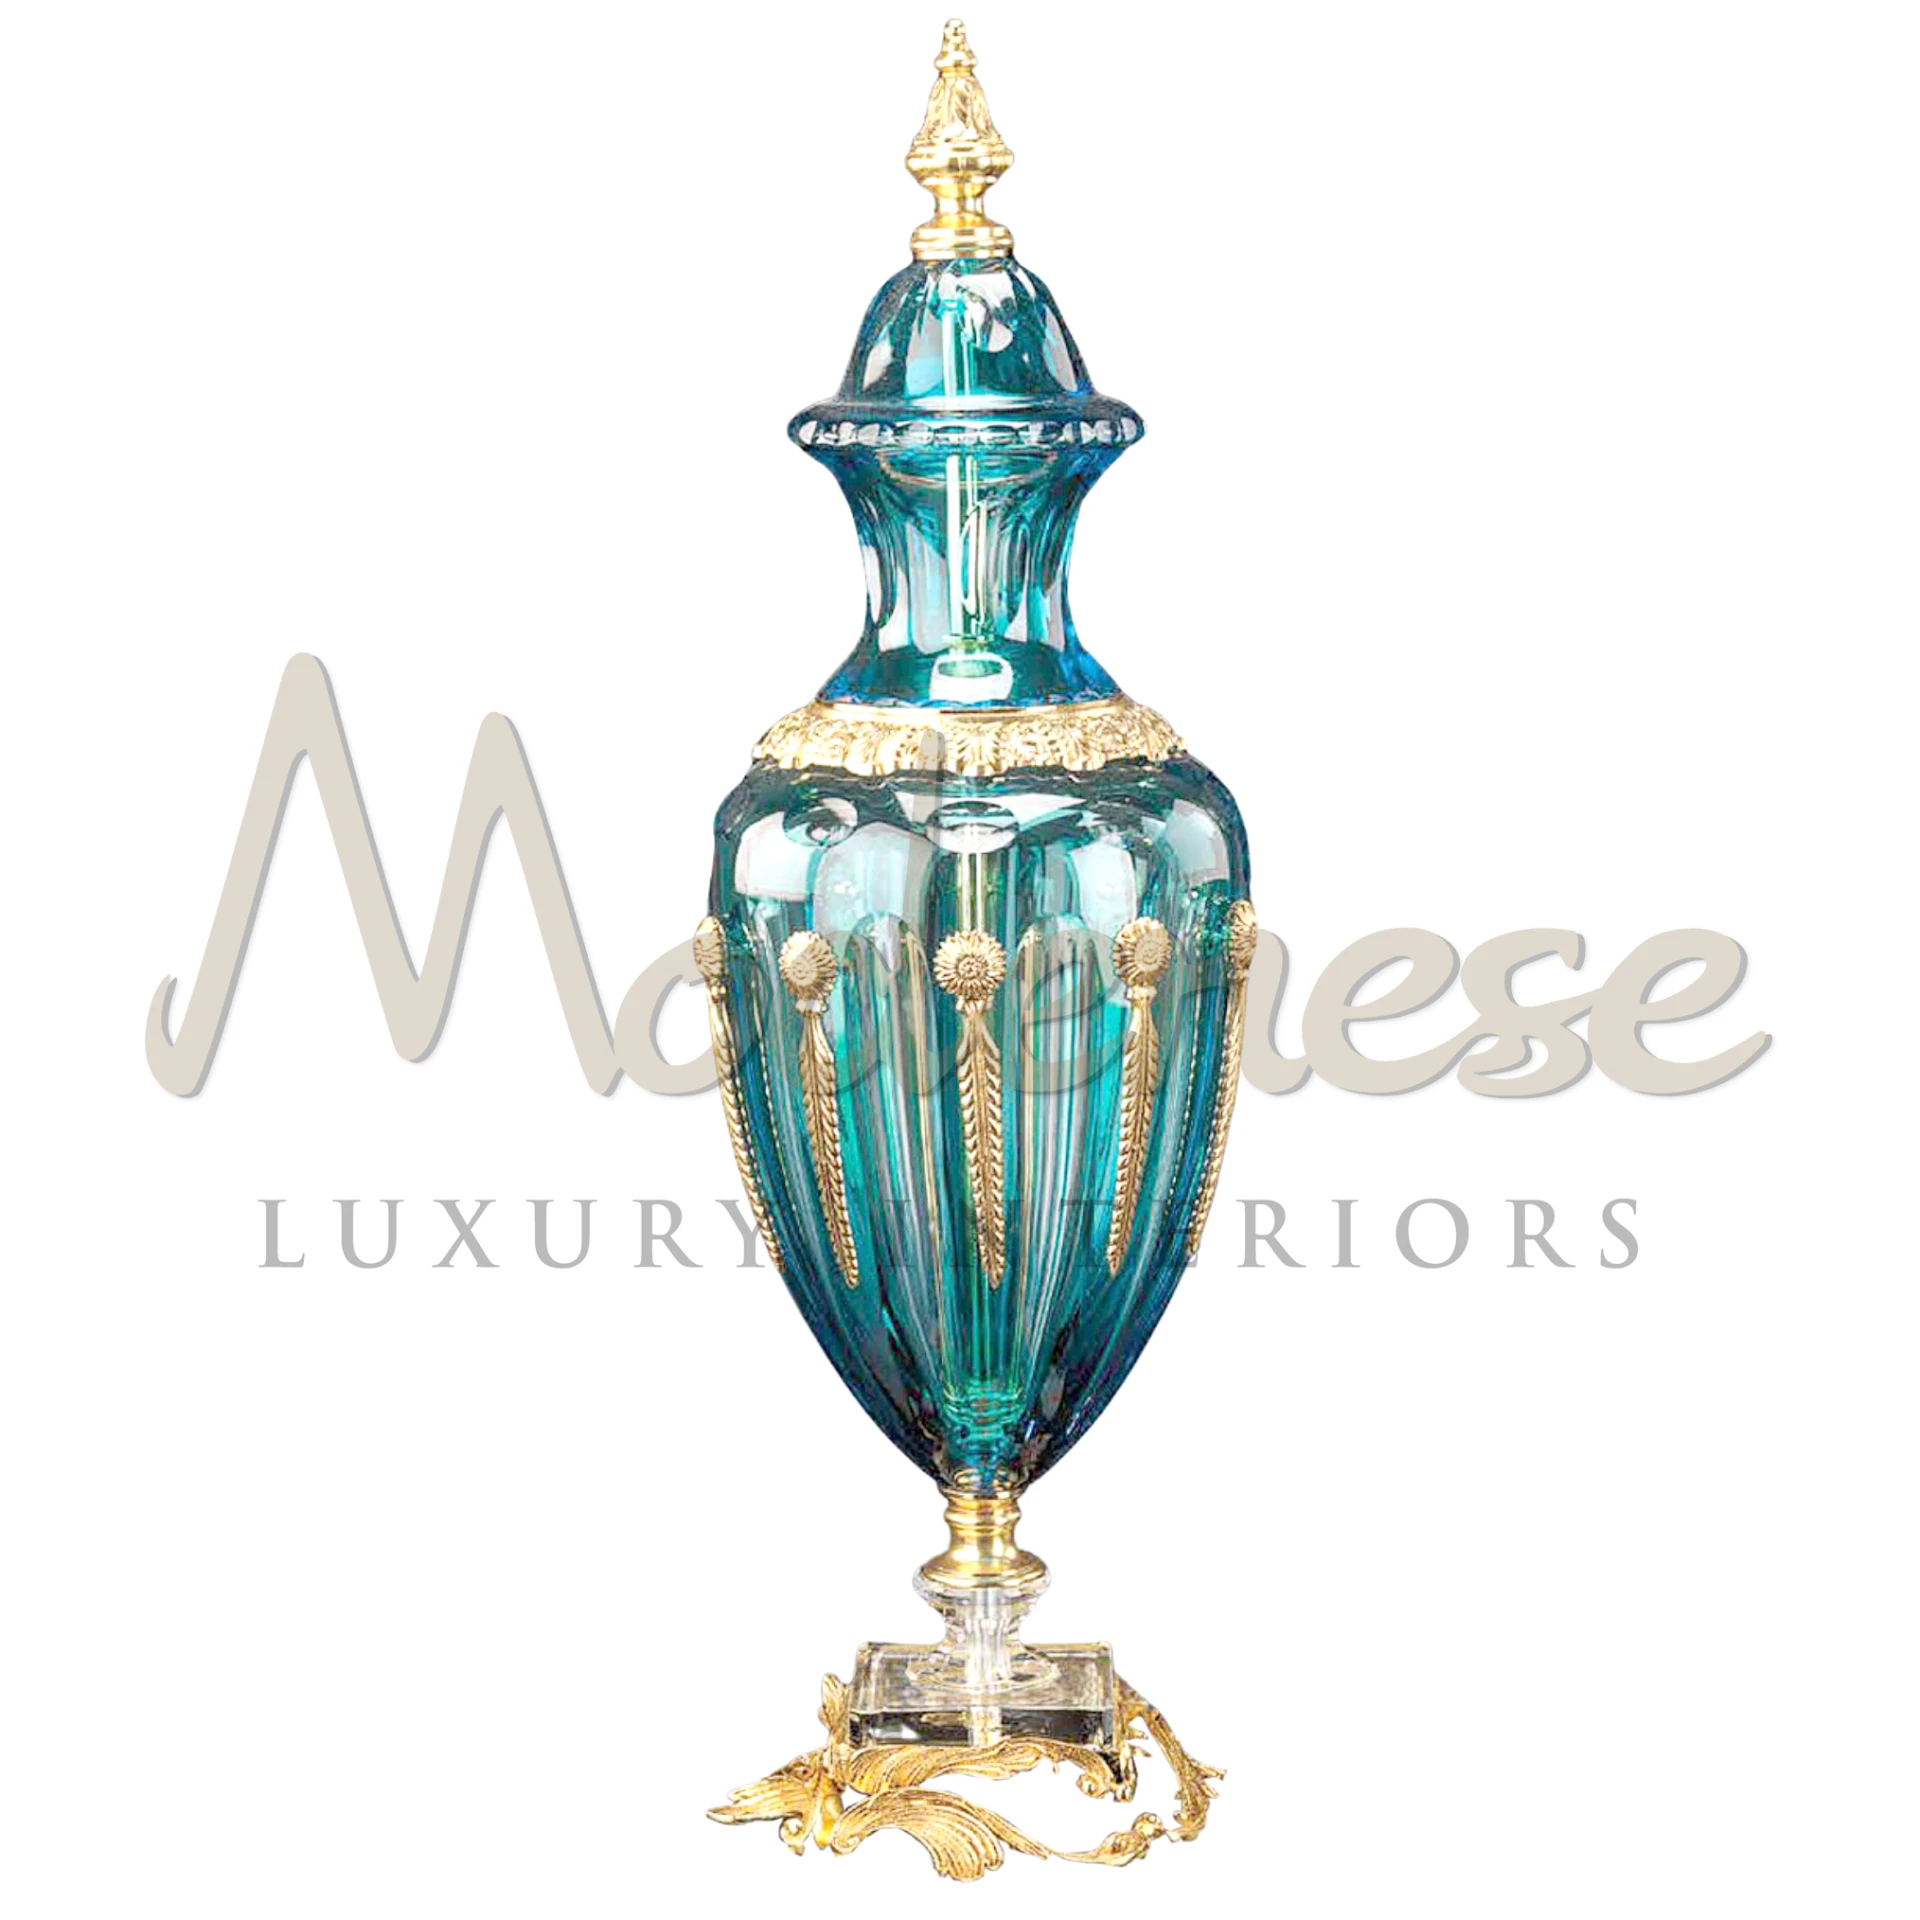 Classical Luxury Turquoise Amphora, in the style of ancient Greek or Roman art, showcases intricate designs and artisan craftsmanship for luxurious interiors.






